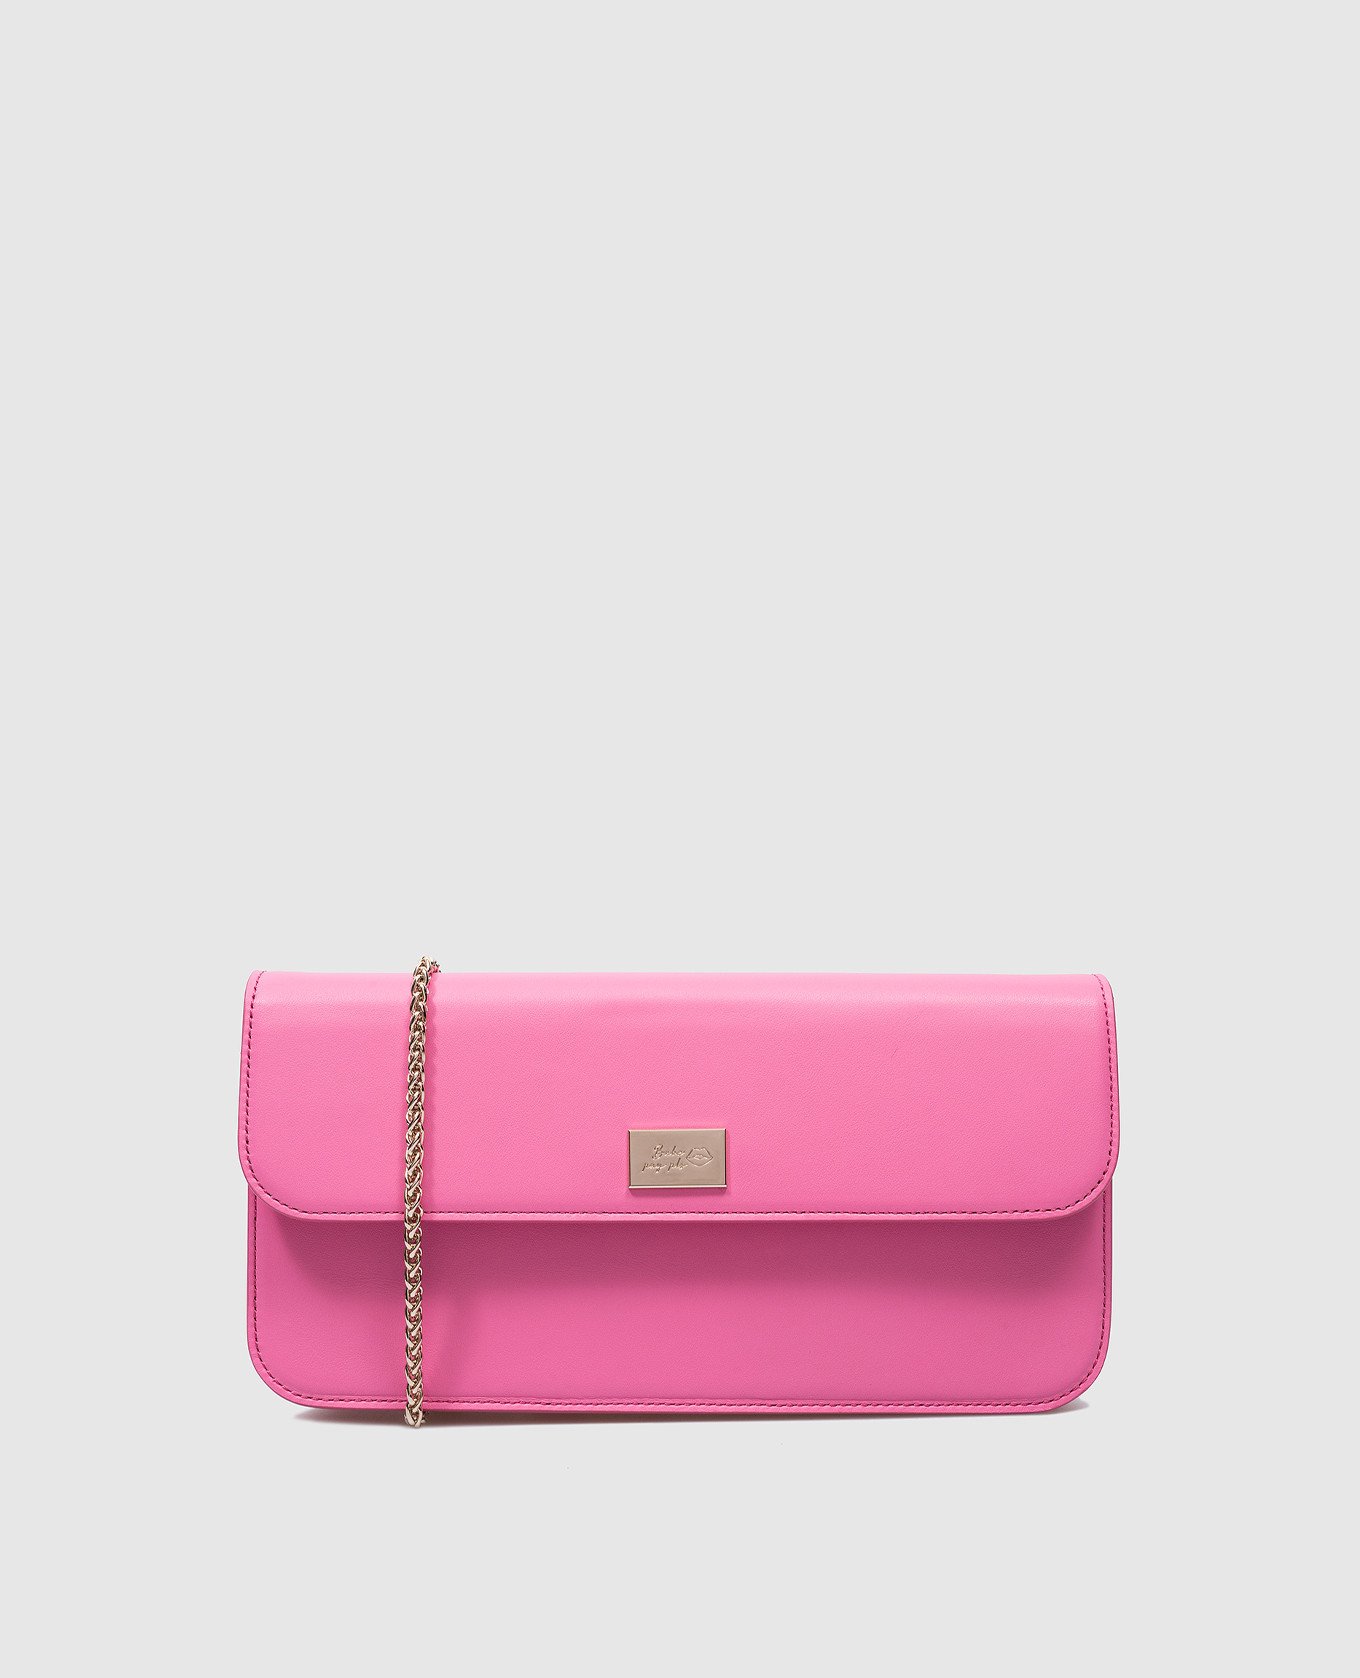 Pink leather baguette bag with metal logo